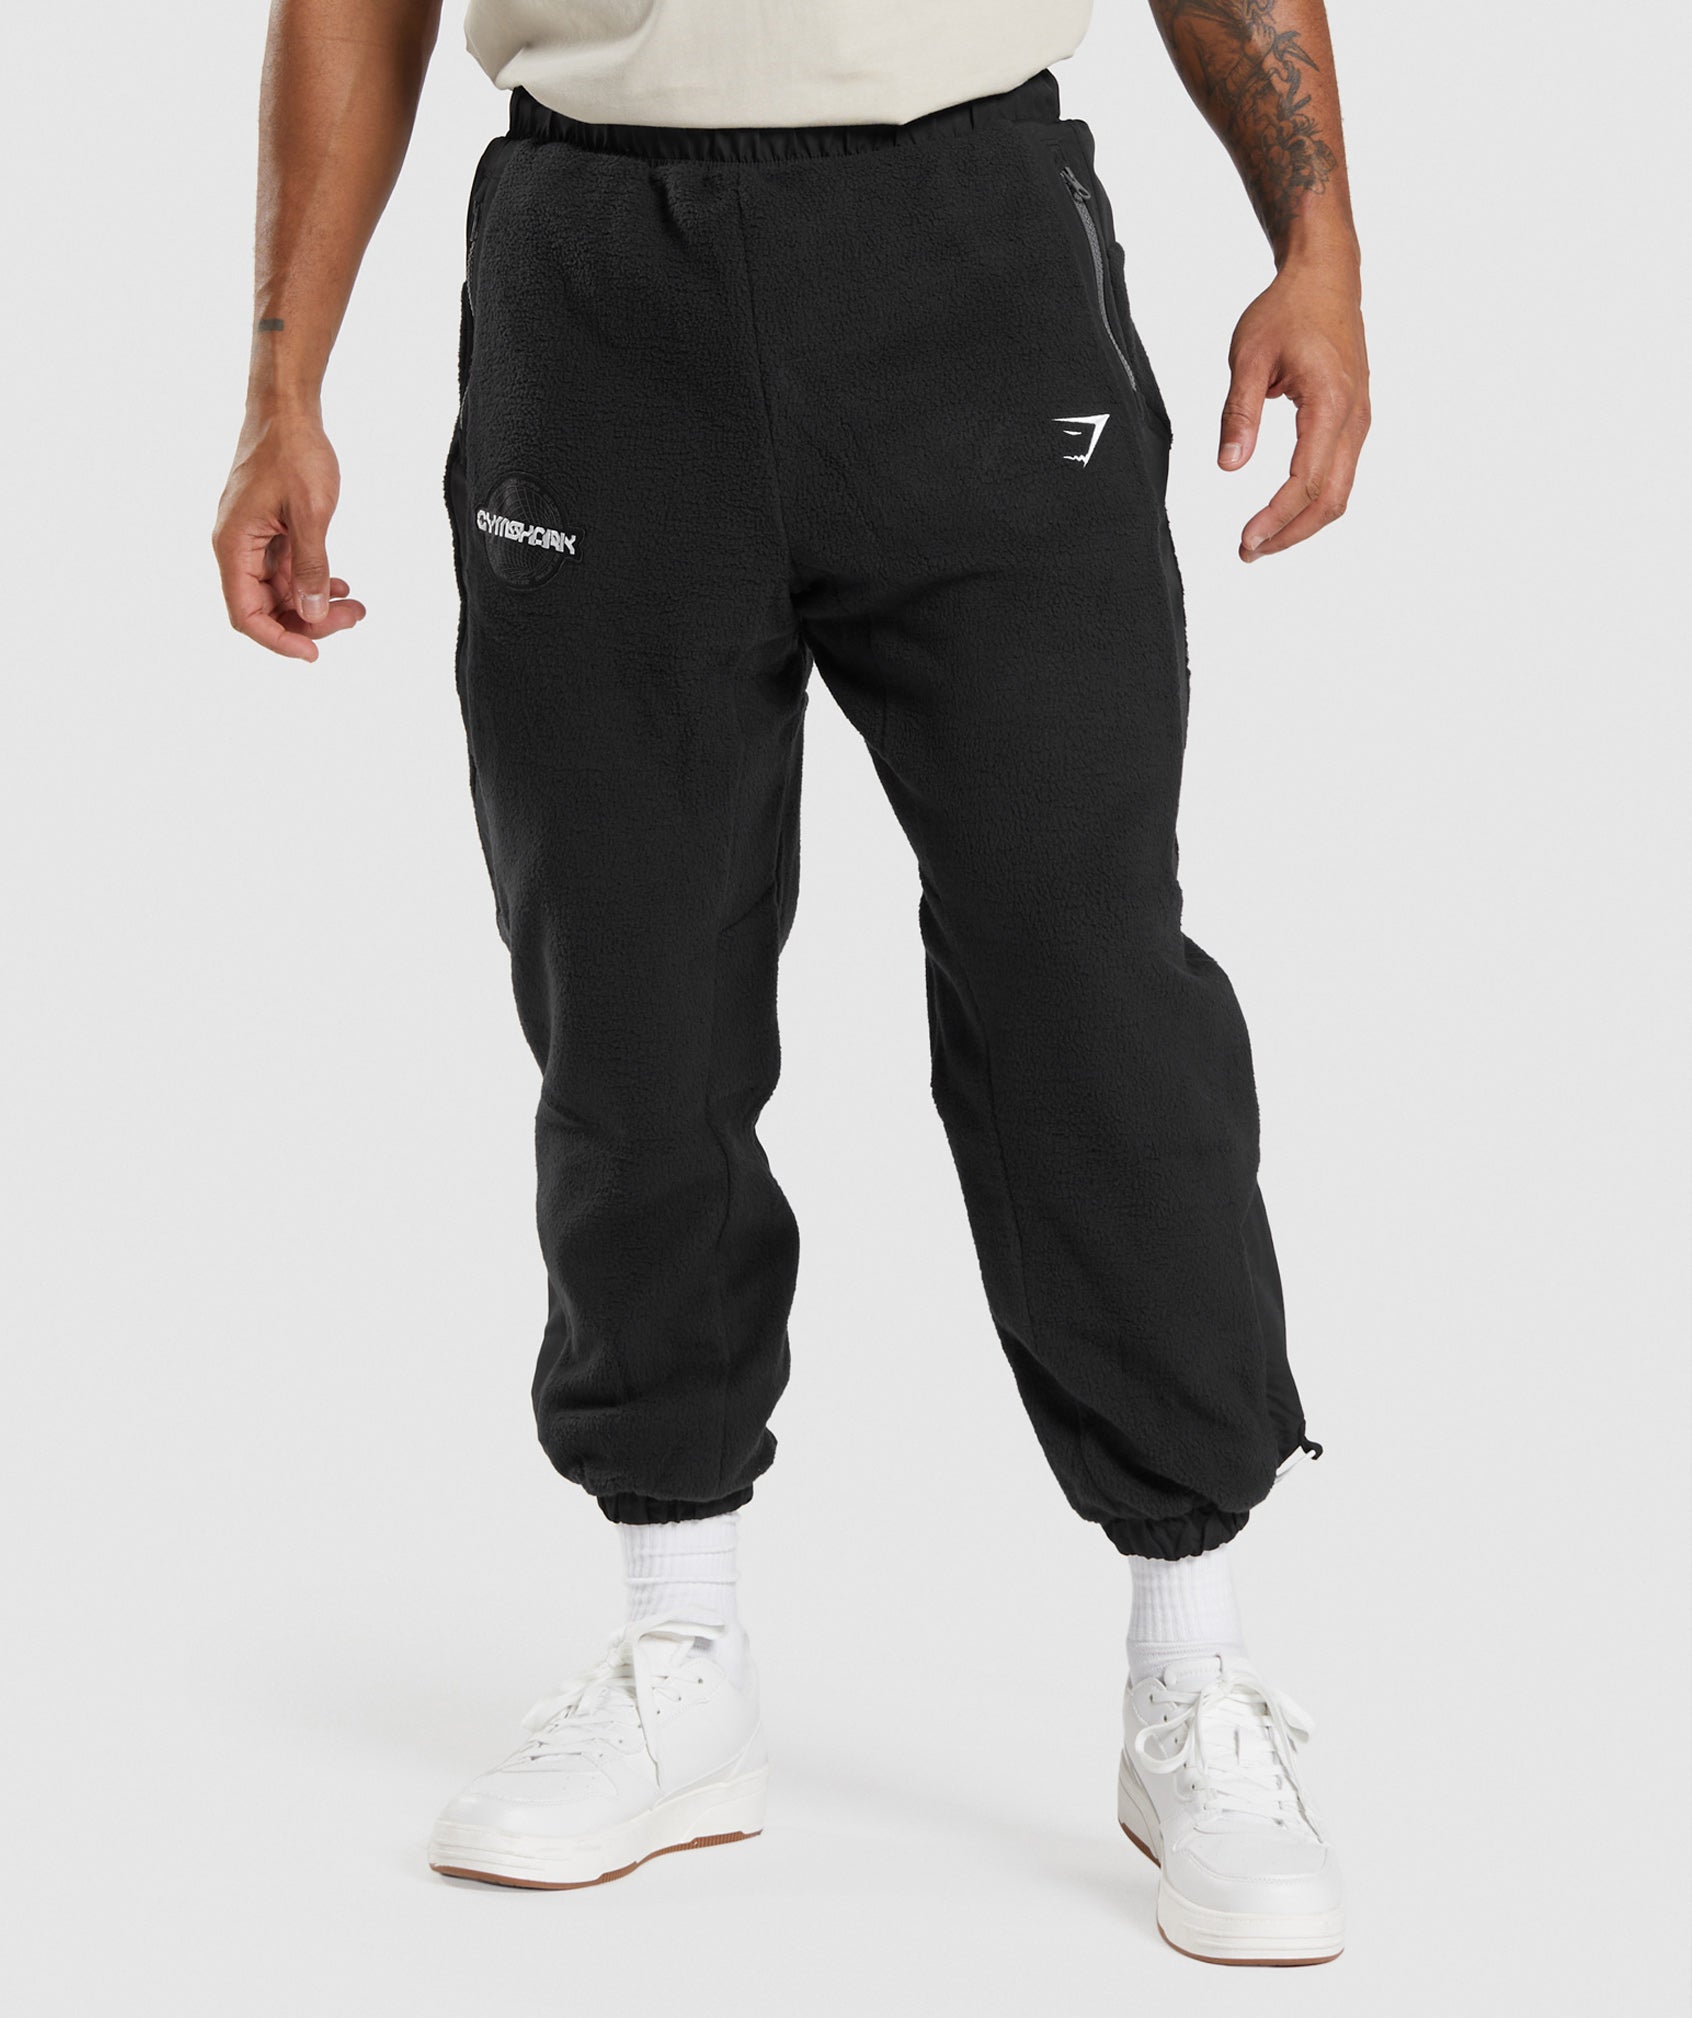 Vibes Joggers